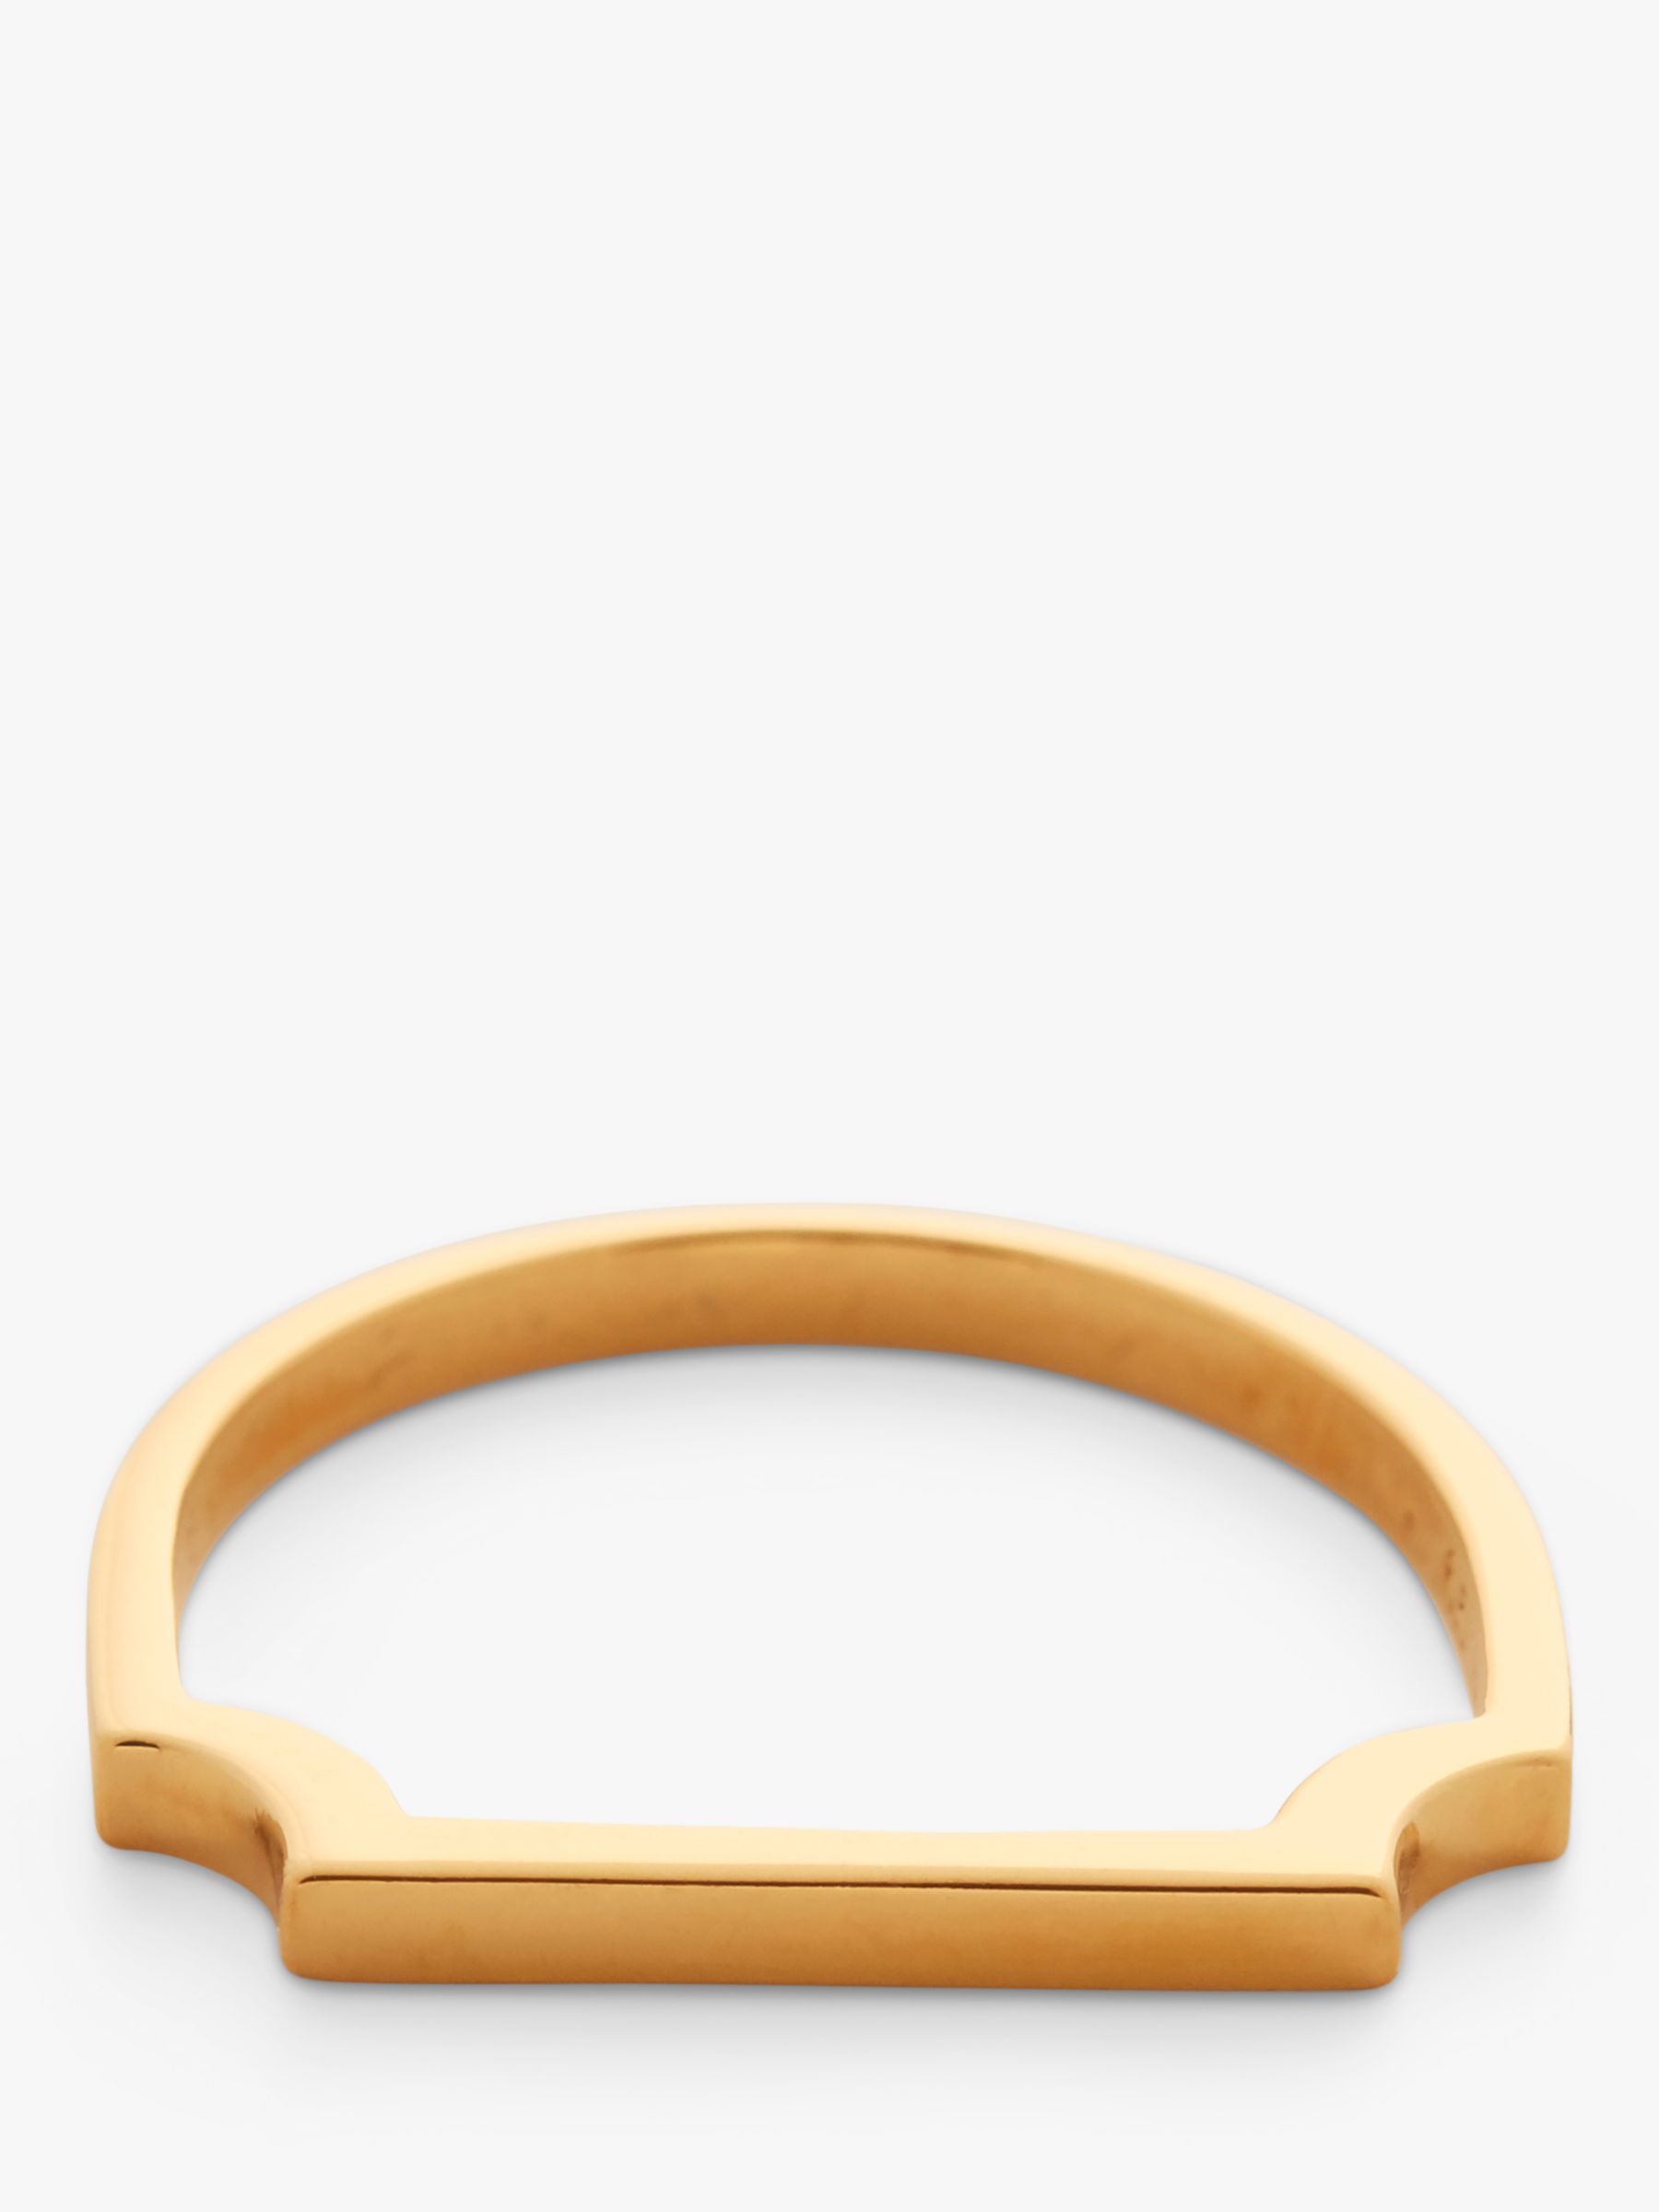 Buy Monica Vinader Signature Thin Ring, Gold Online at johnlewis.com